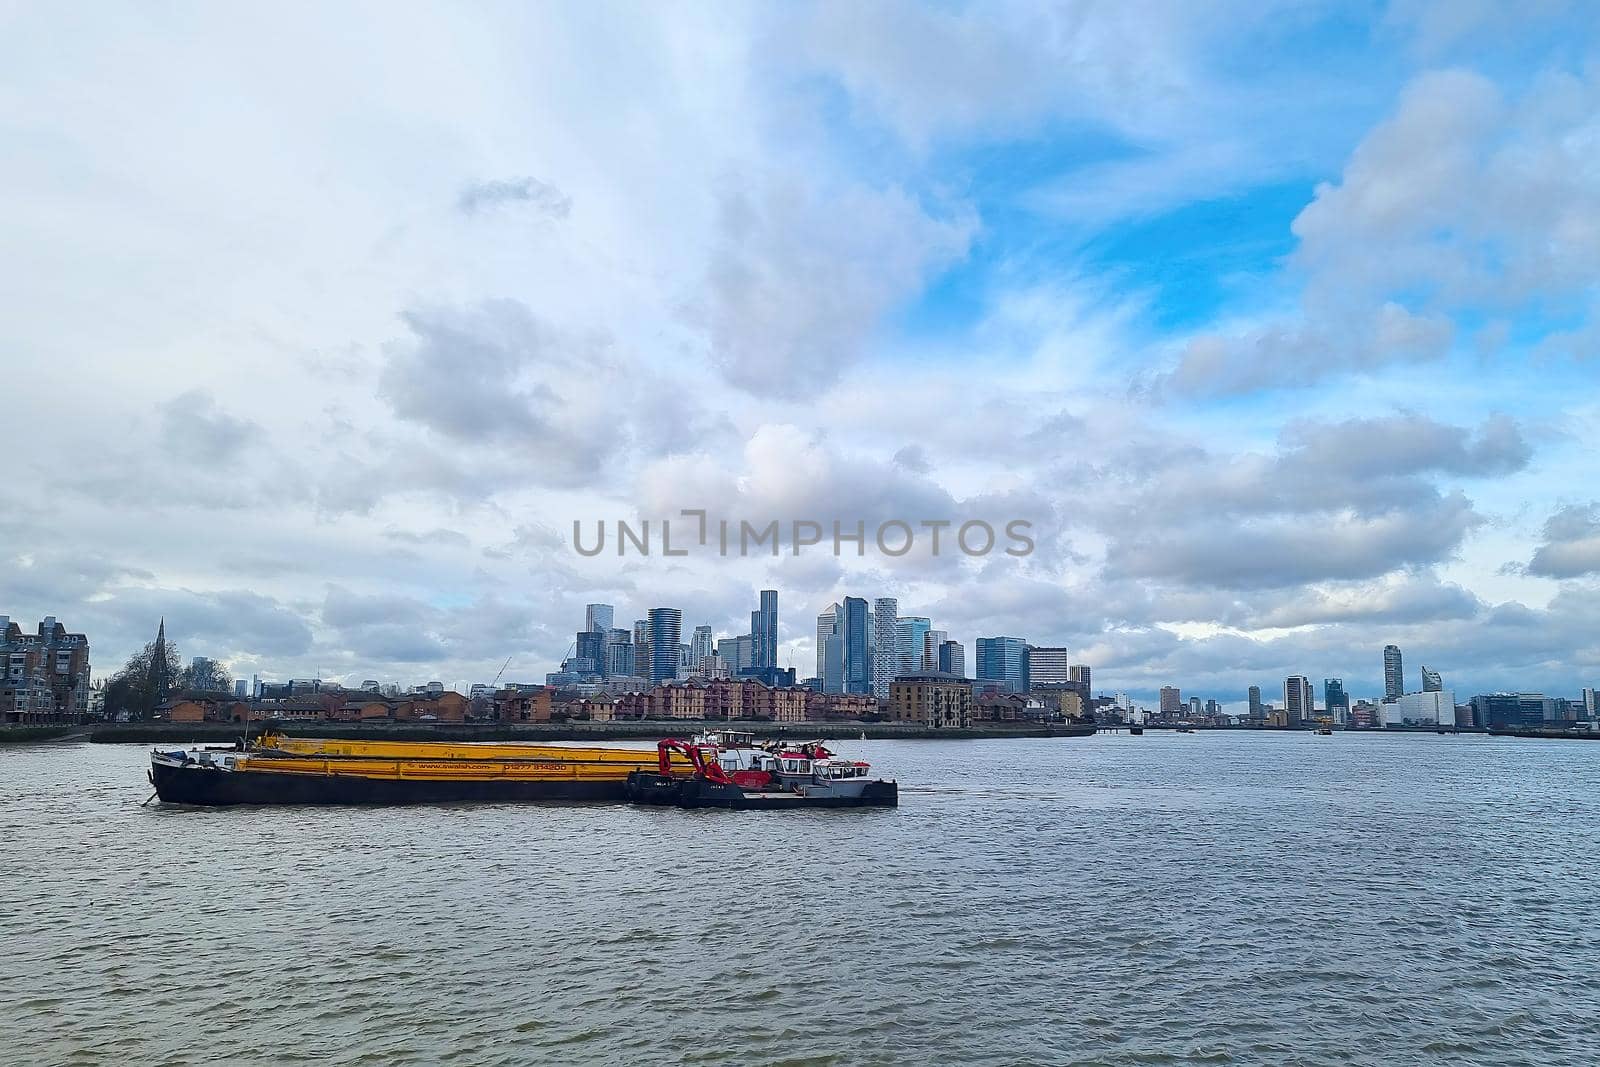 London, United Kingdom, February 7, 2022: Beautiful view of the tall buildings of London from the River Thames. by kip02kas